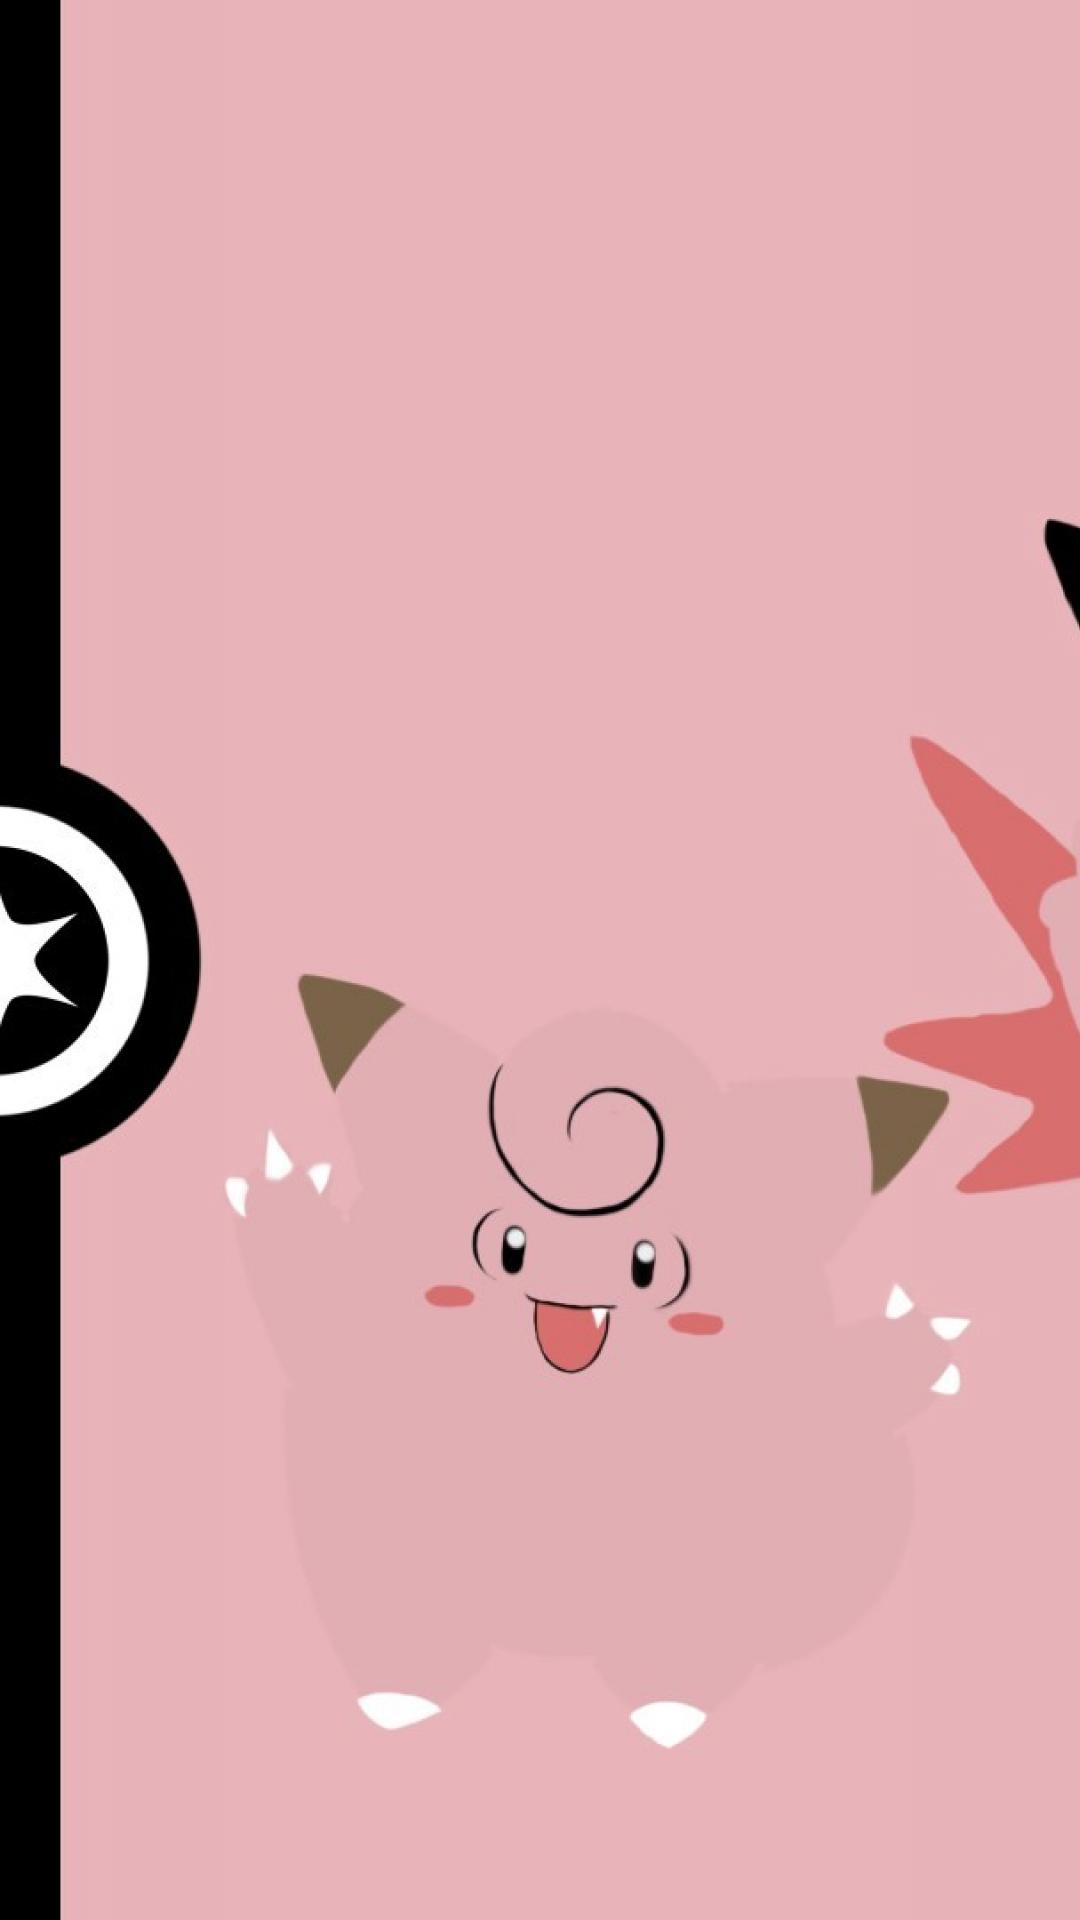 Pokemon Video Games Clefairy Clefable Game Characters